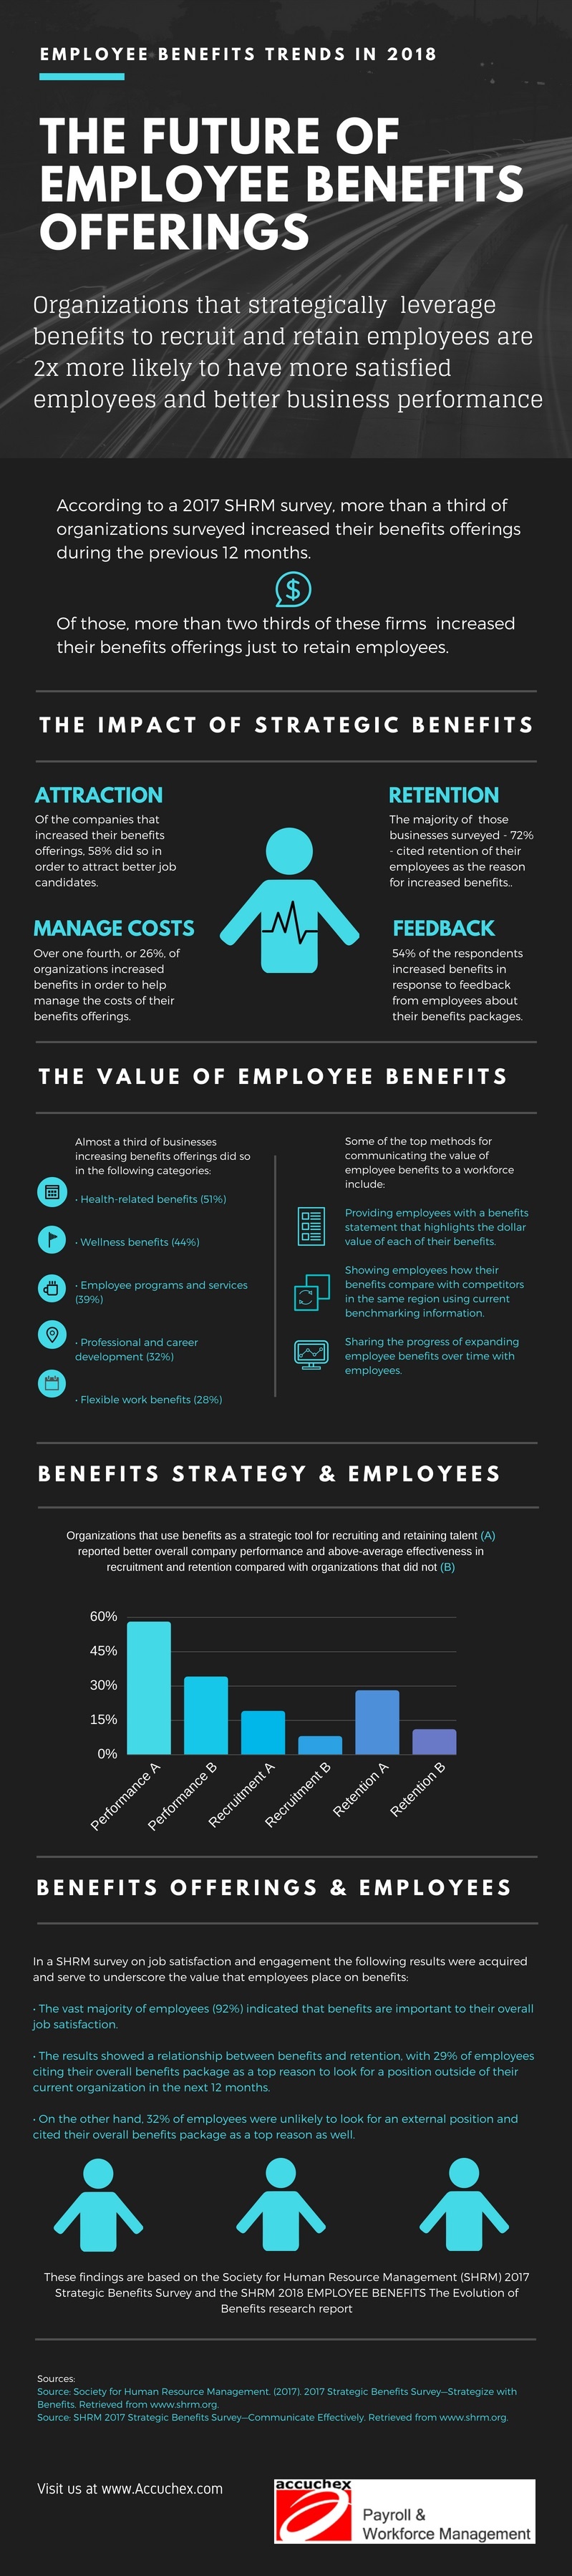 the-future-of--Employee-Benefits-offerings-infographic